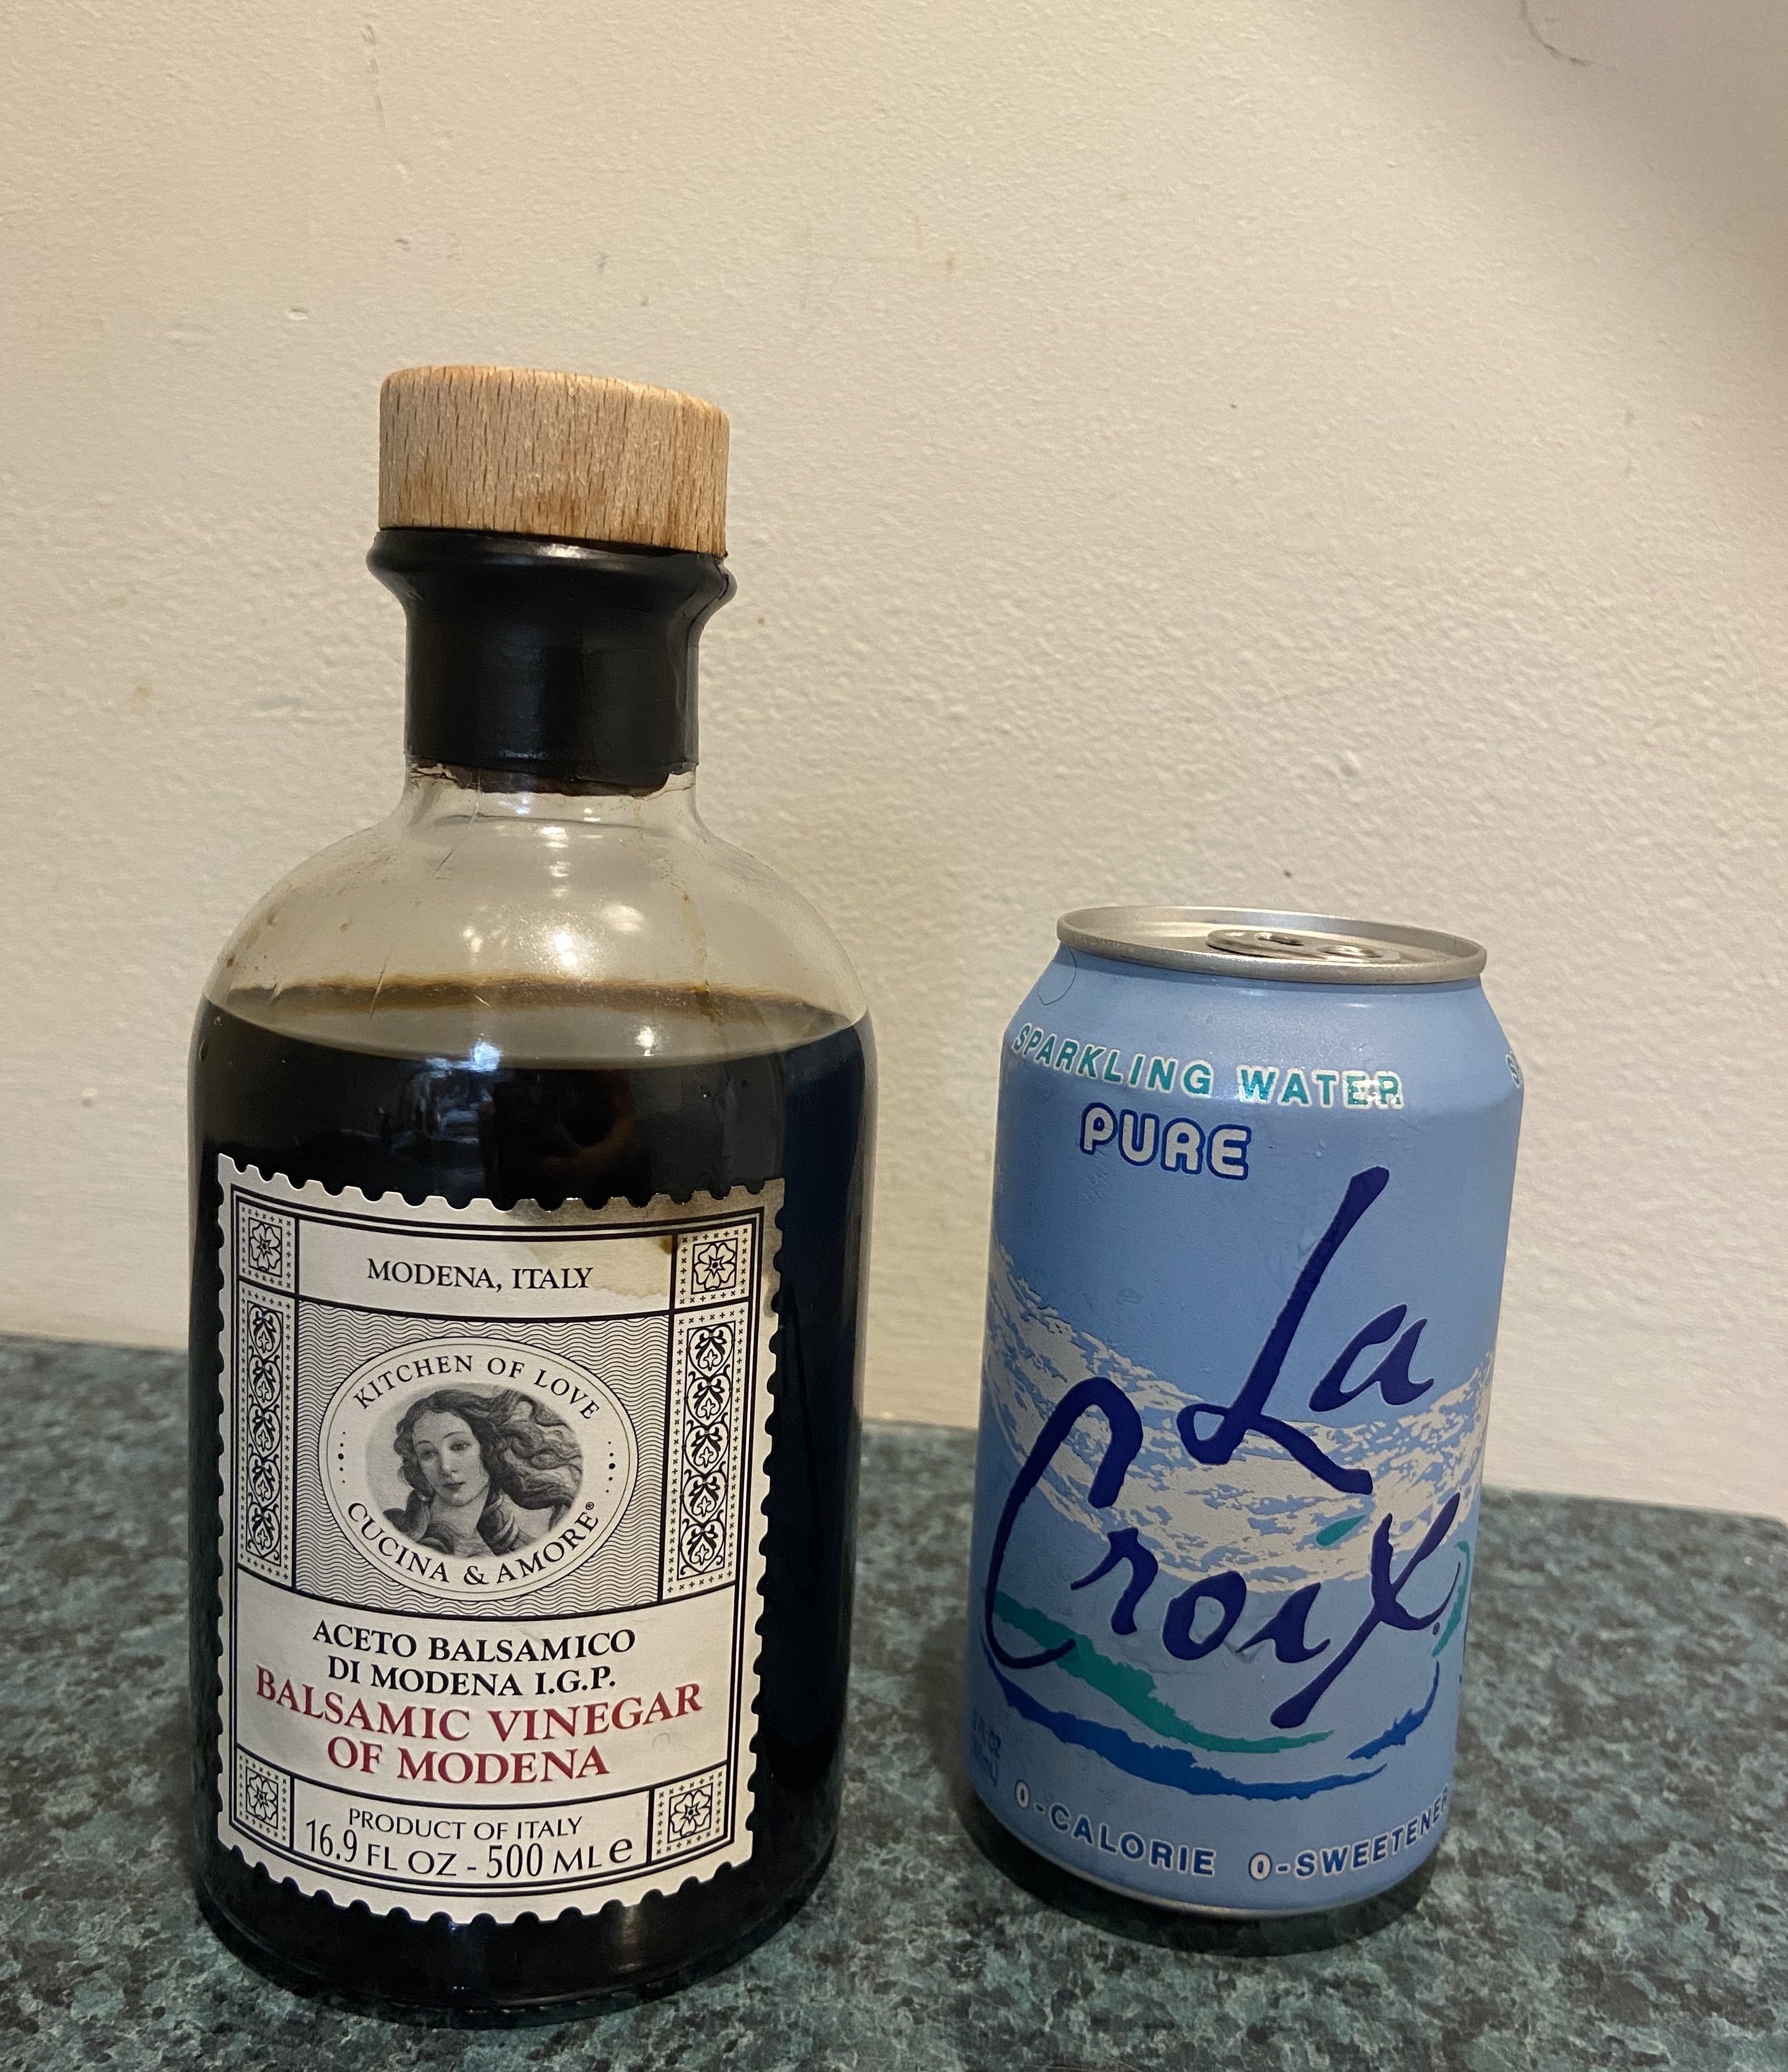 A bottle of balsamic vinegar and a can of La Croix